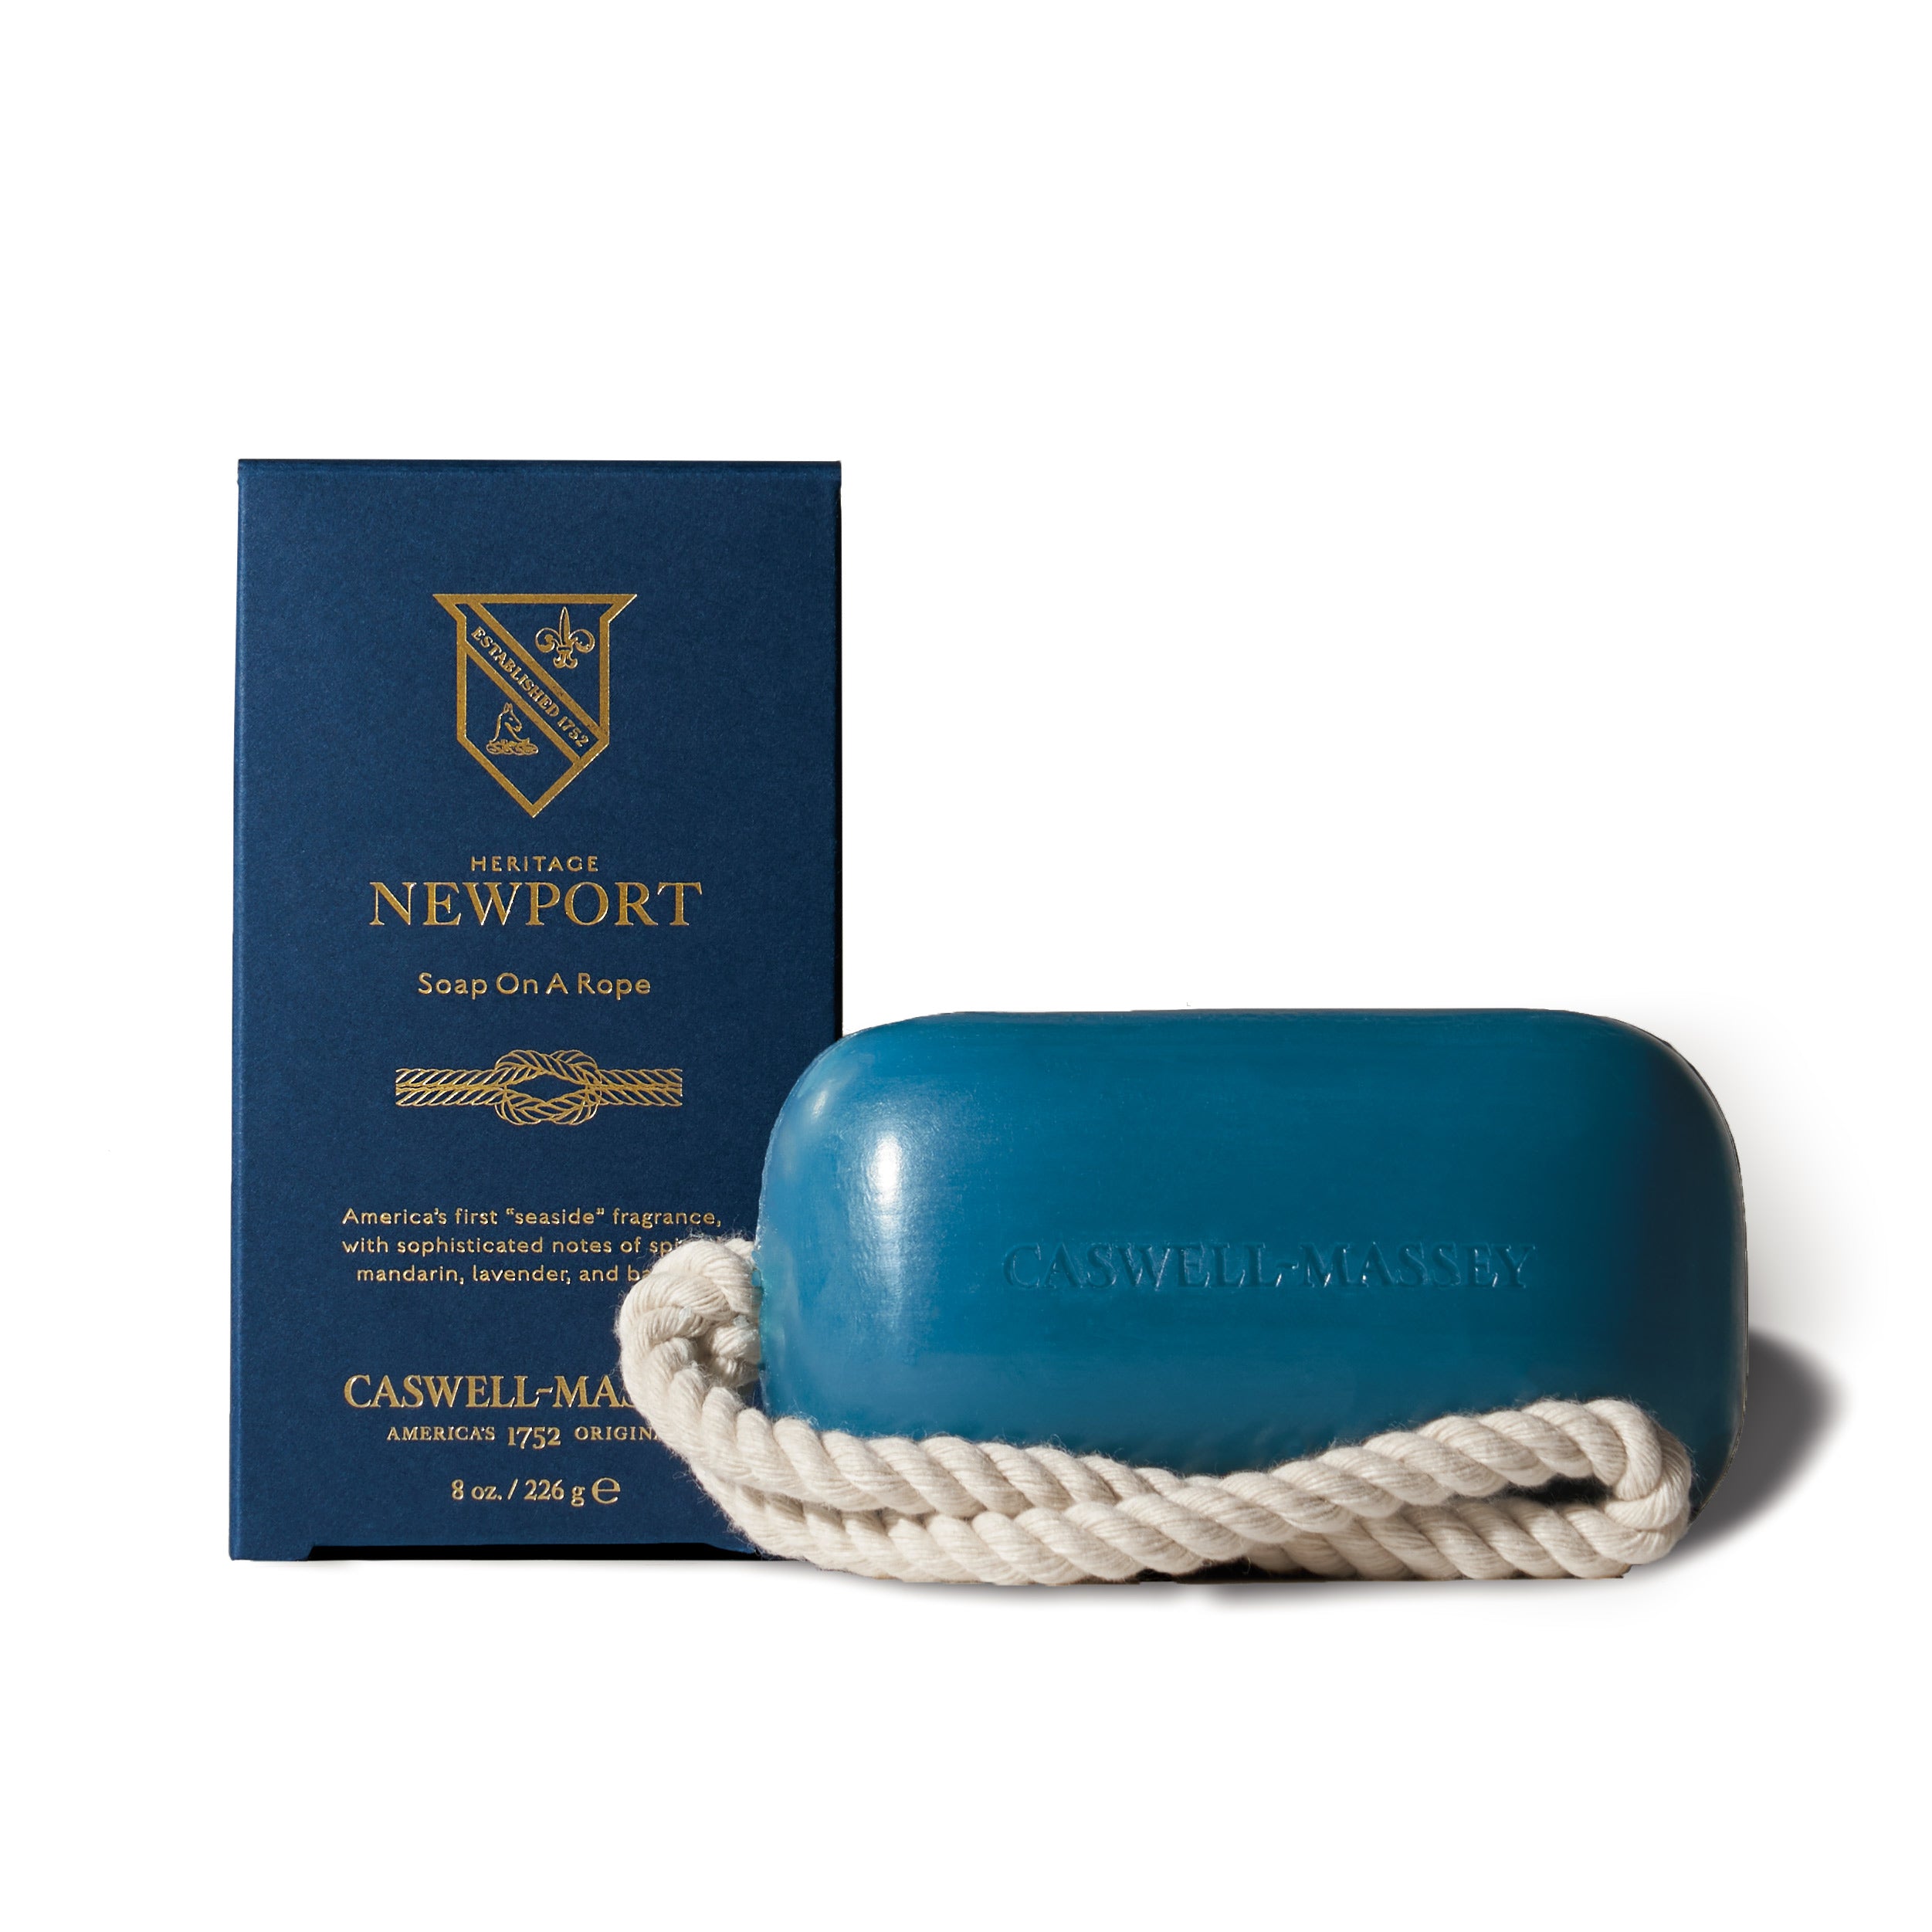 Caswell-Massey Newport Soap-on-a-Rope: navy blue soap with white rope shown next to blue box